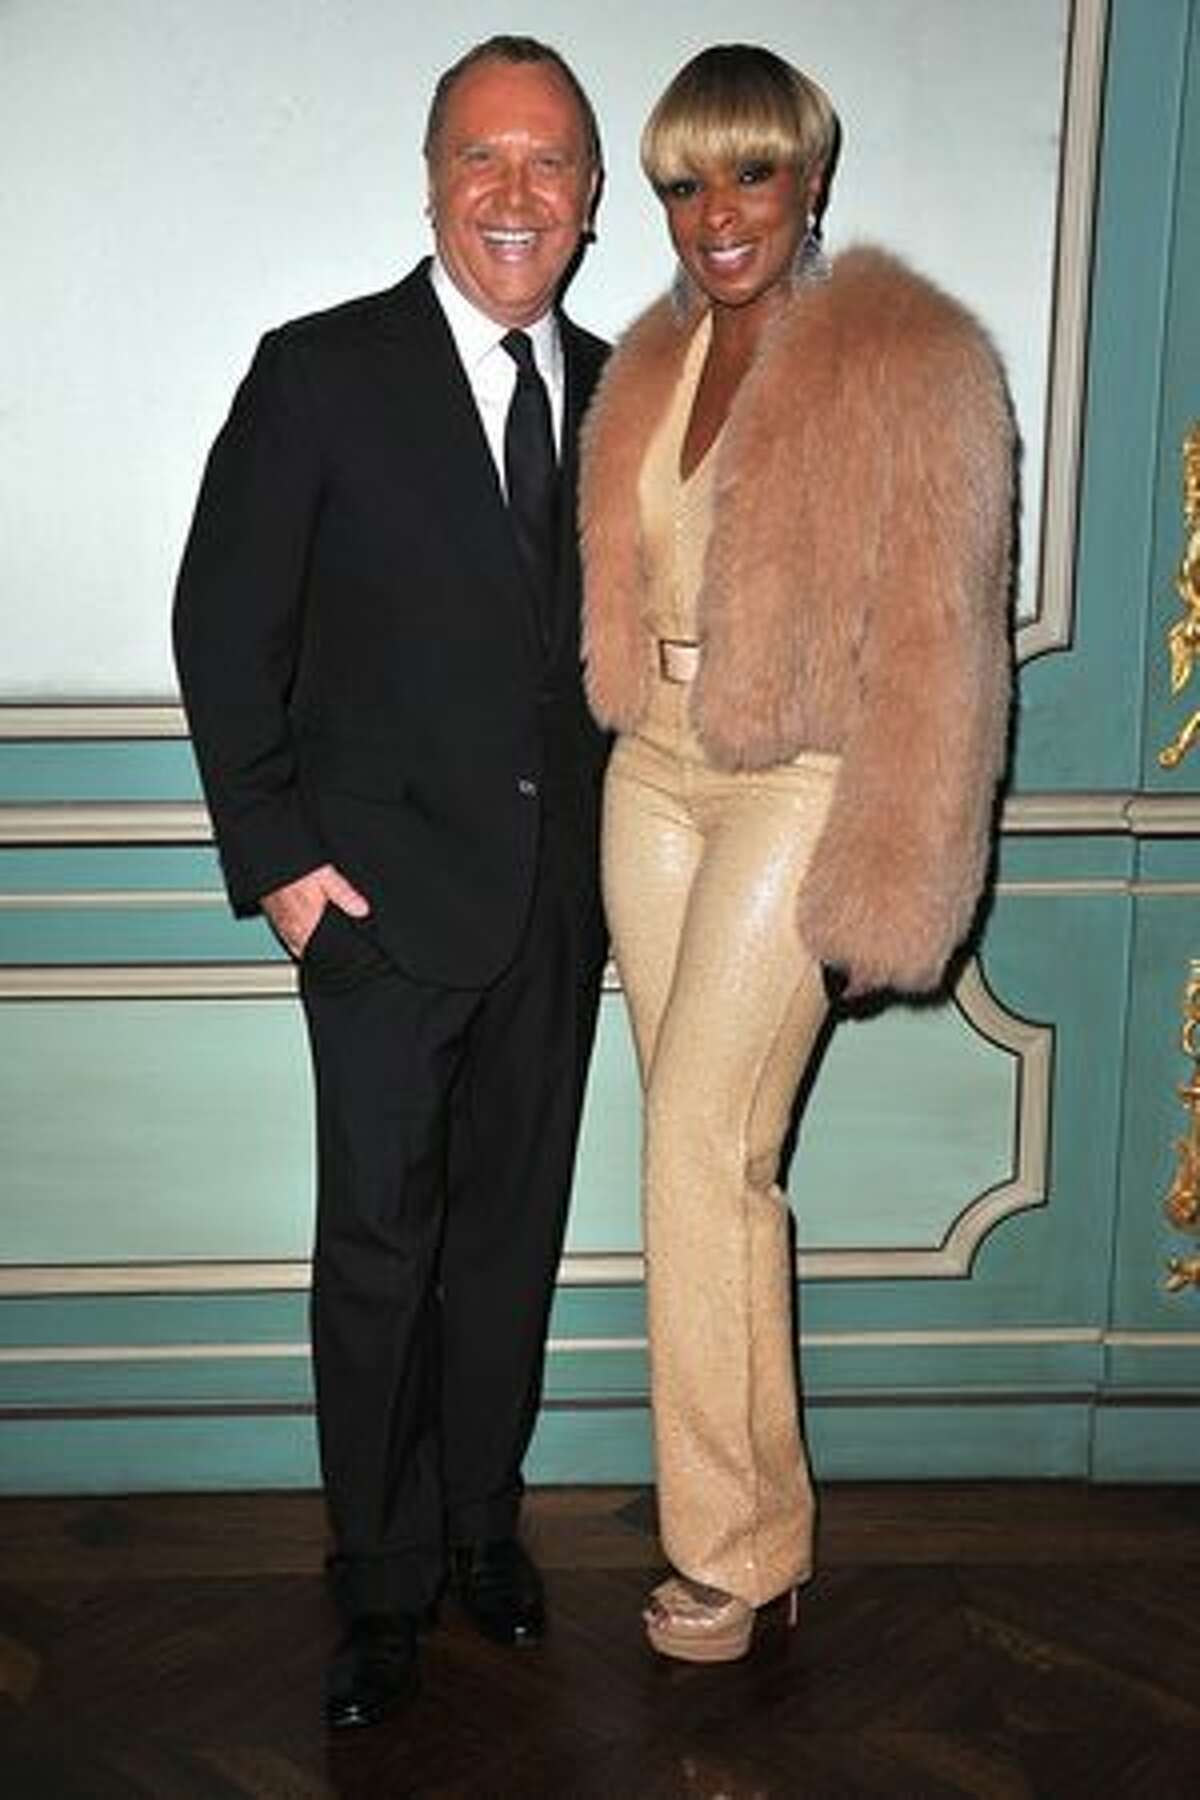 Michael Kors and Mary J. Blige attend a cocktail and dinner hosted in honor of designer Michael Kors during Paris Fashion Week Fall/Winter 2012 at the Embassy Of The United States in Paris, France.